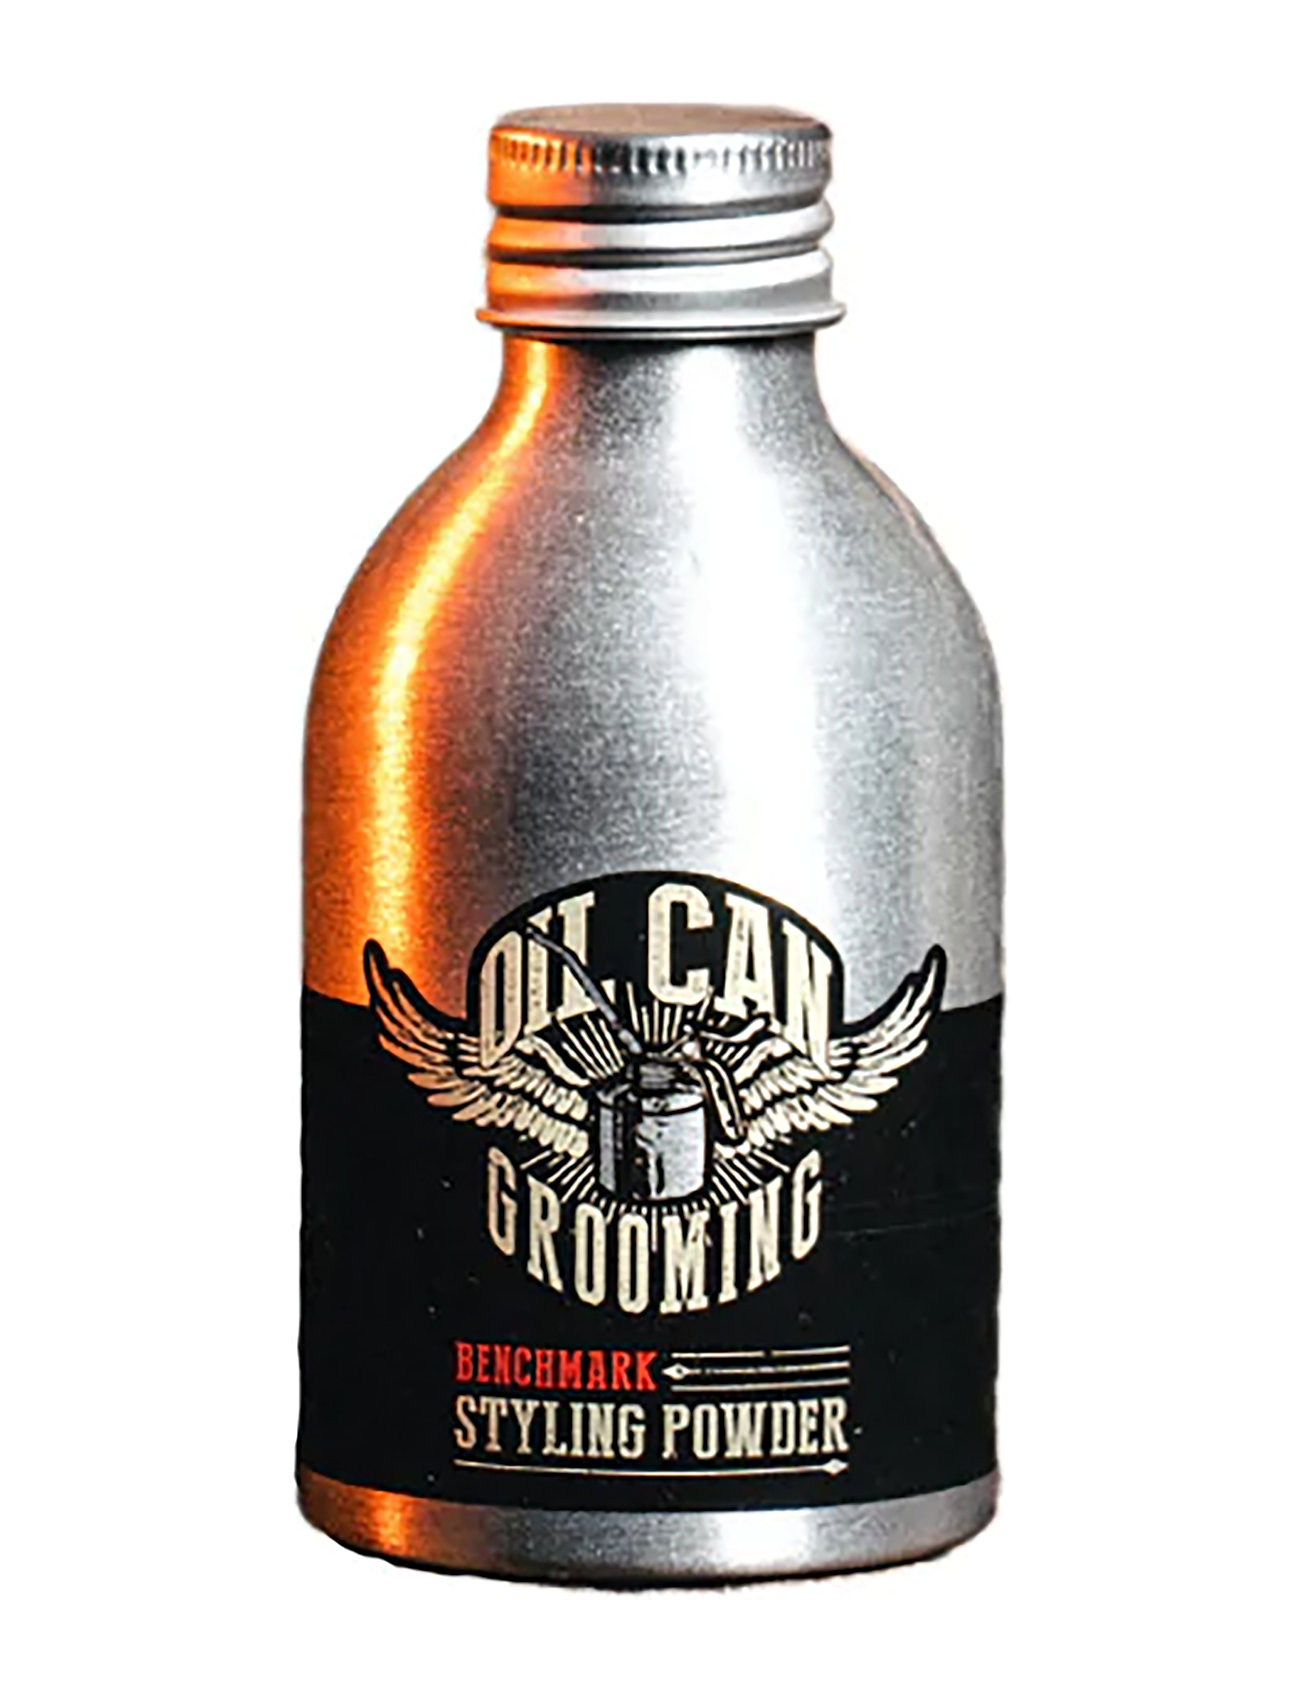 Styling Powder Beauty Men Hair Styling Volume Spray Nude Oil Can Grooming